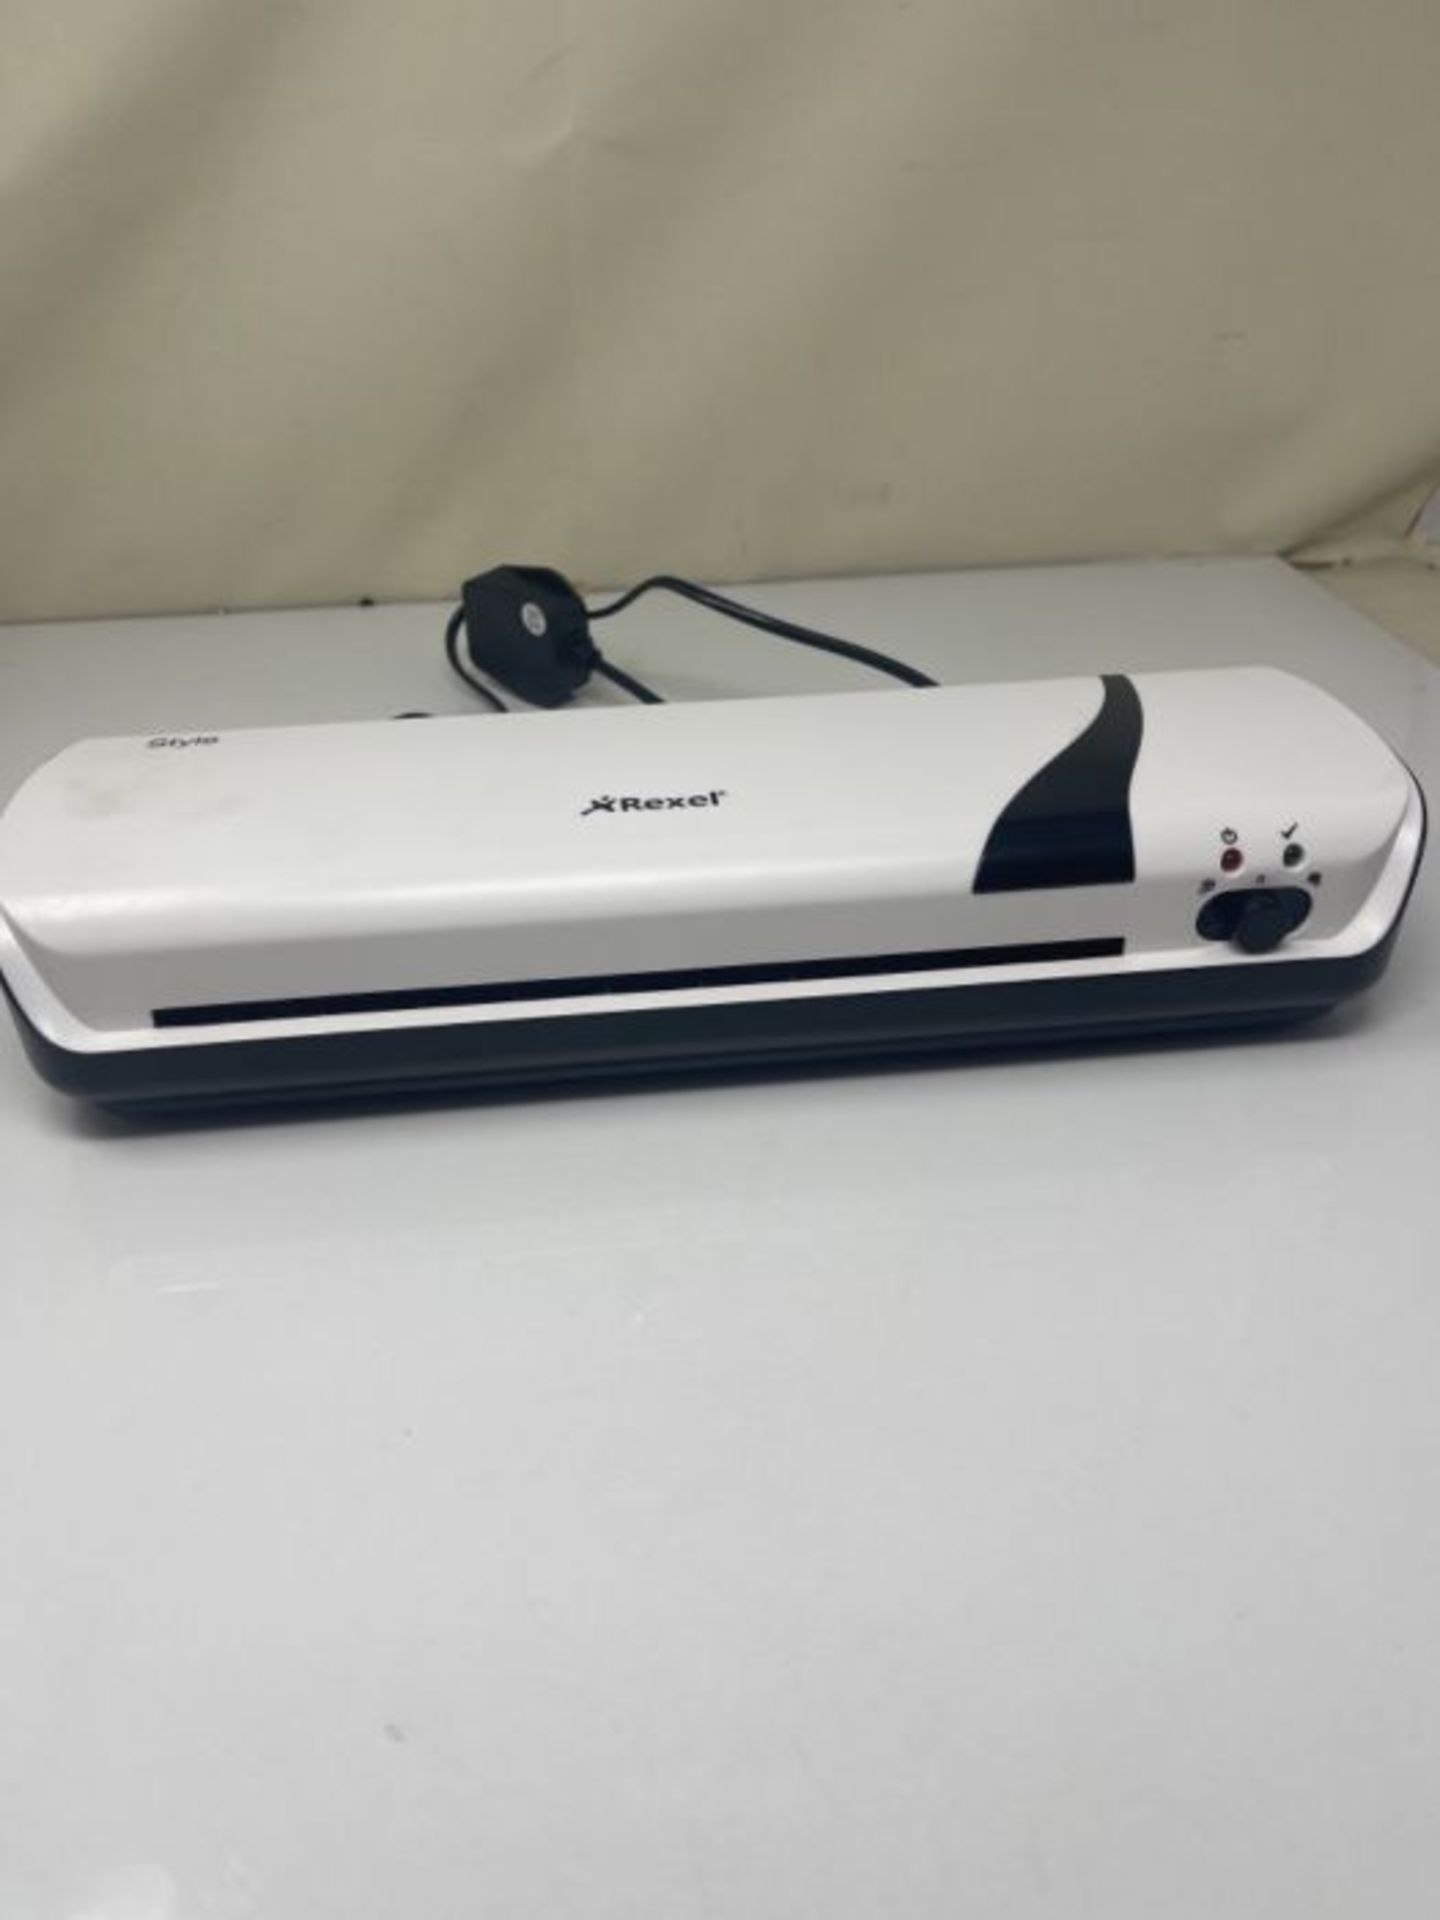 Rexel Style A4 home and office laminator, White, 2104511 - Image 2 of 3